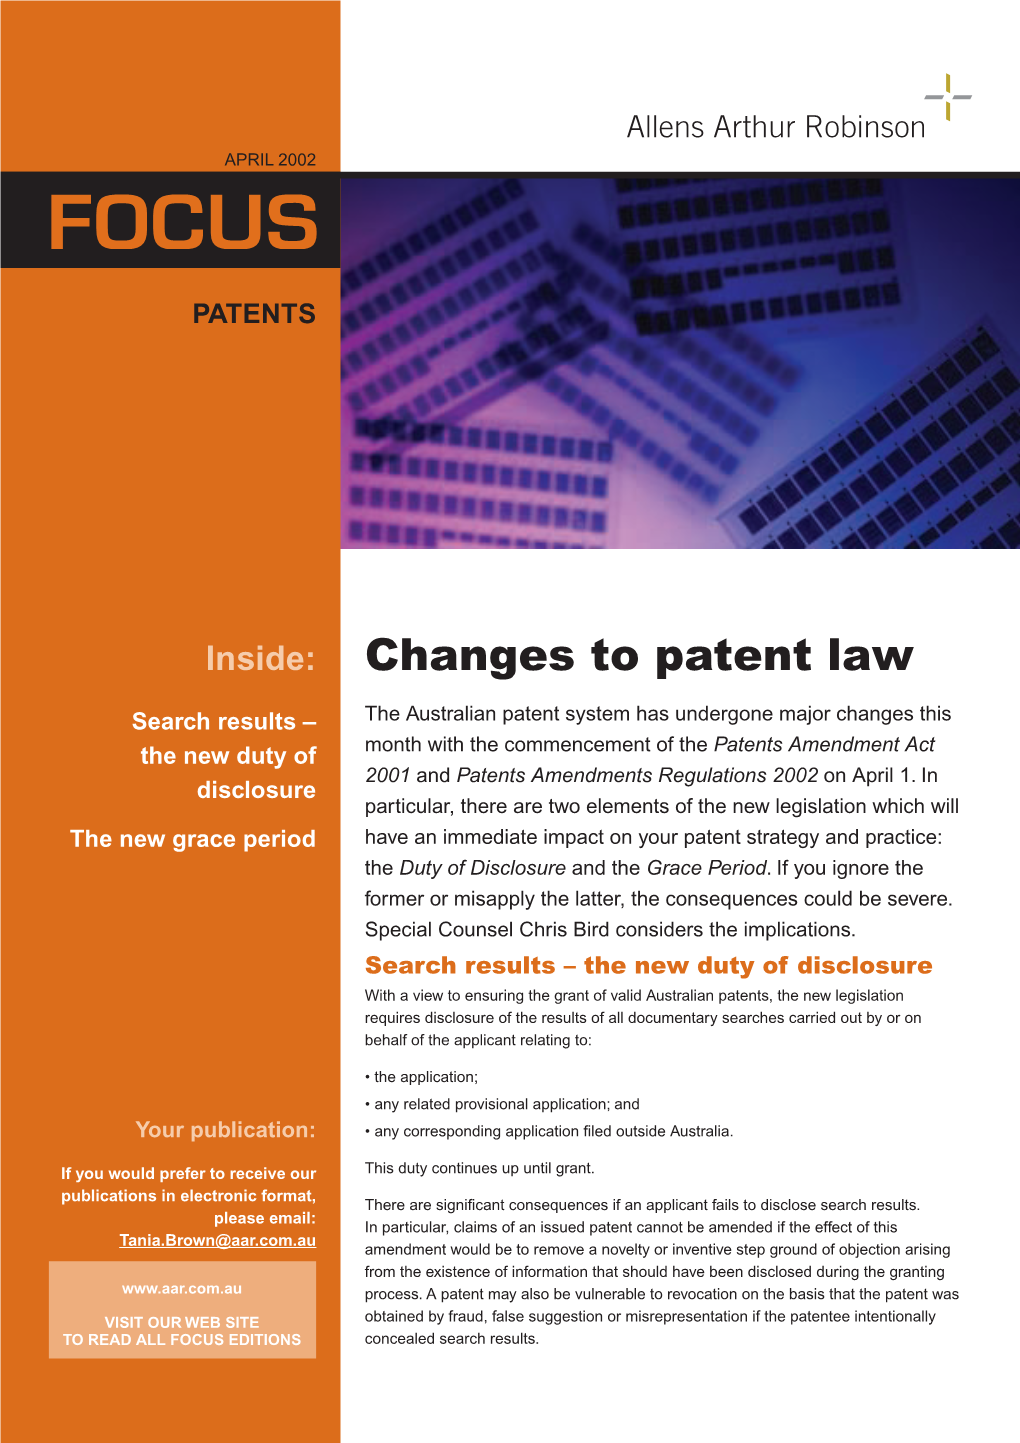 Changes to Patent Law